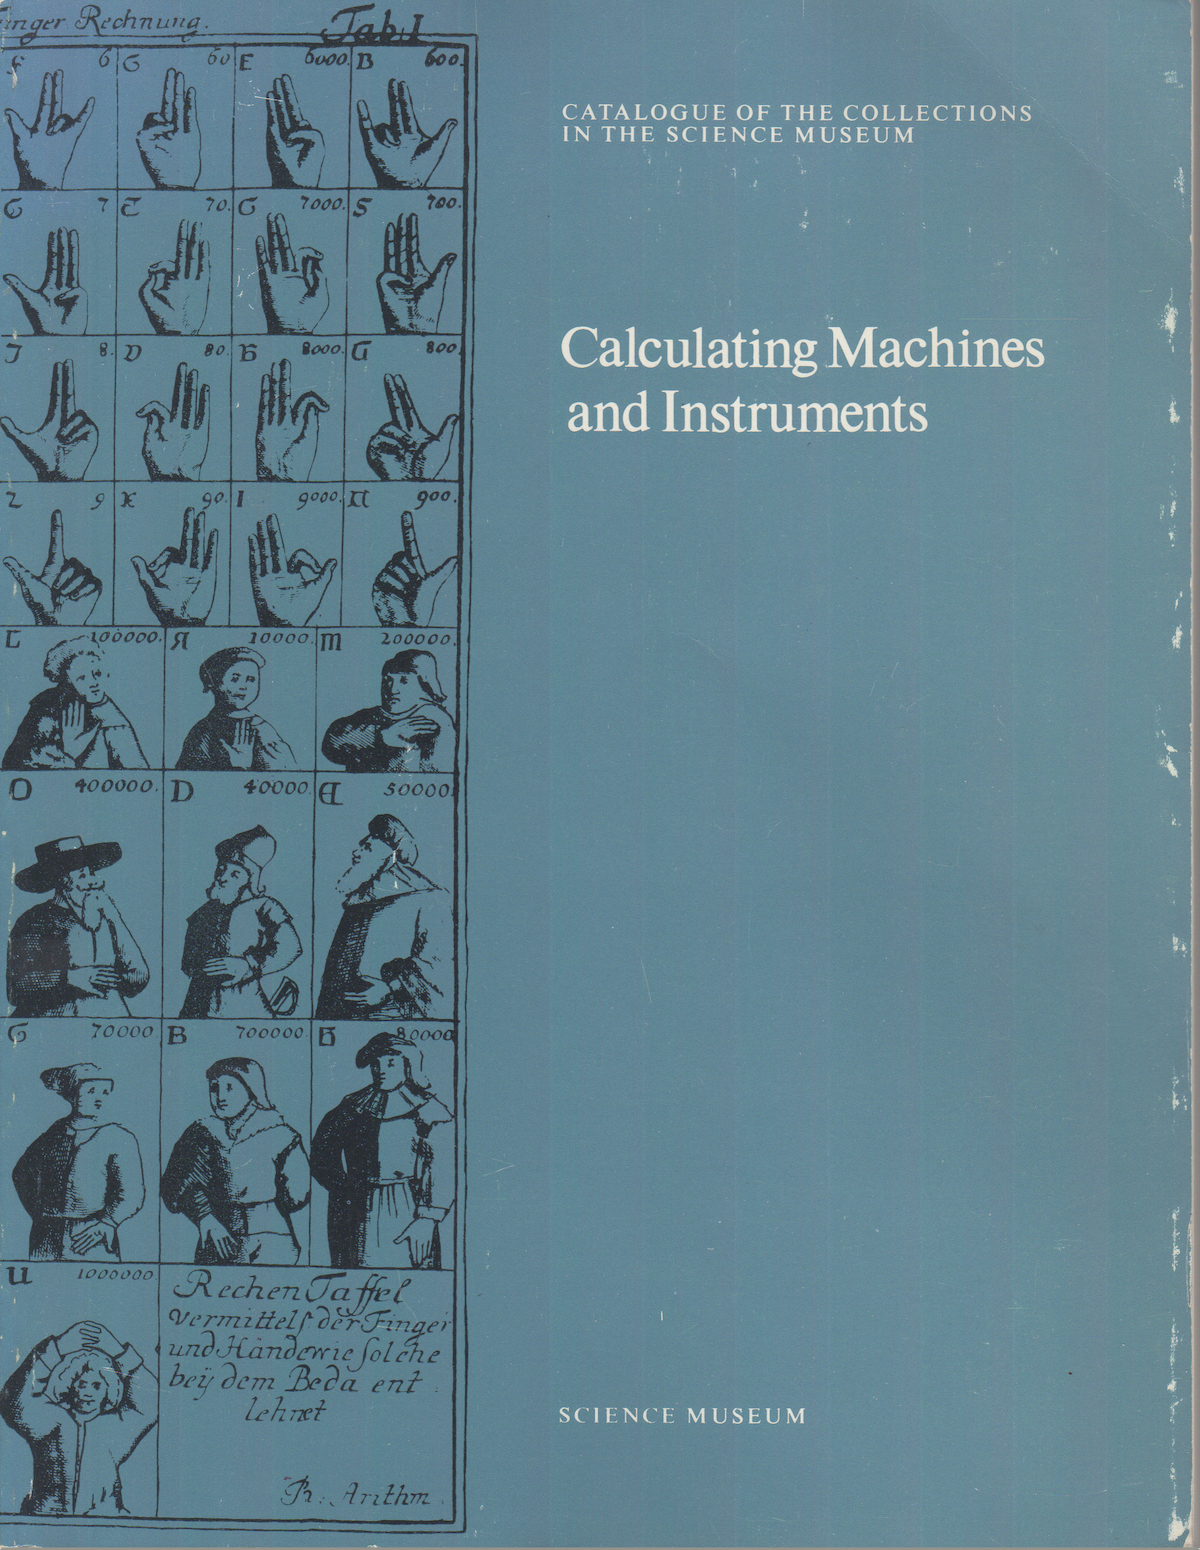 Science Museum: Calculating Machine and Instruments